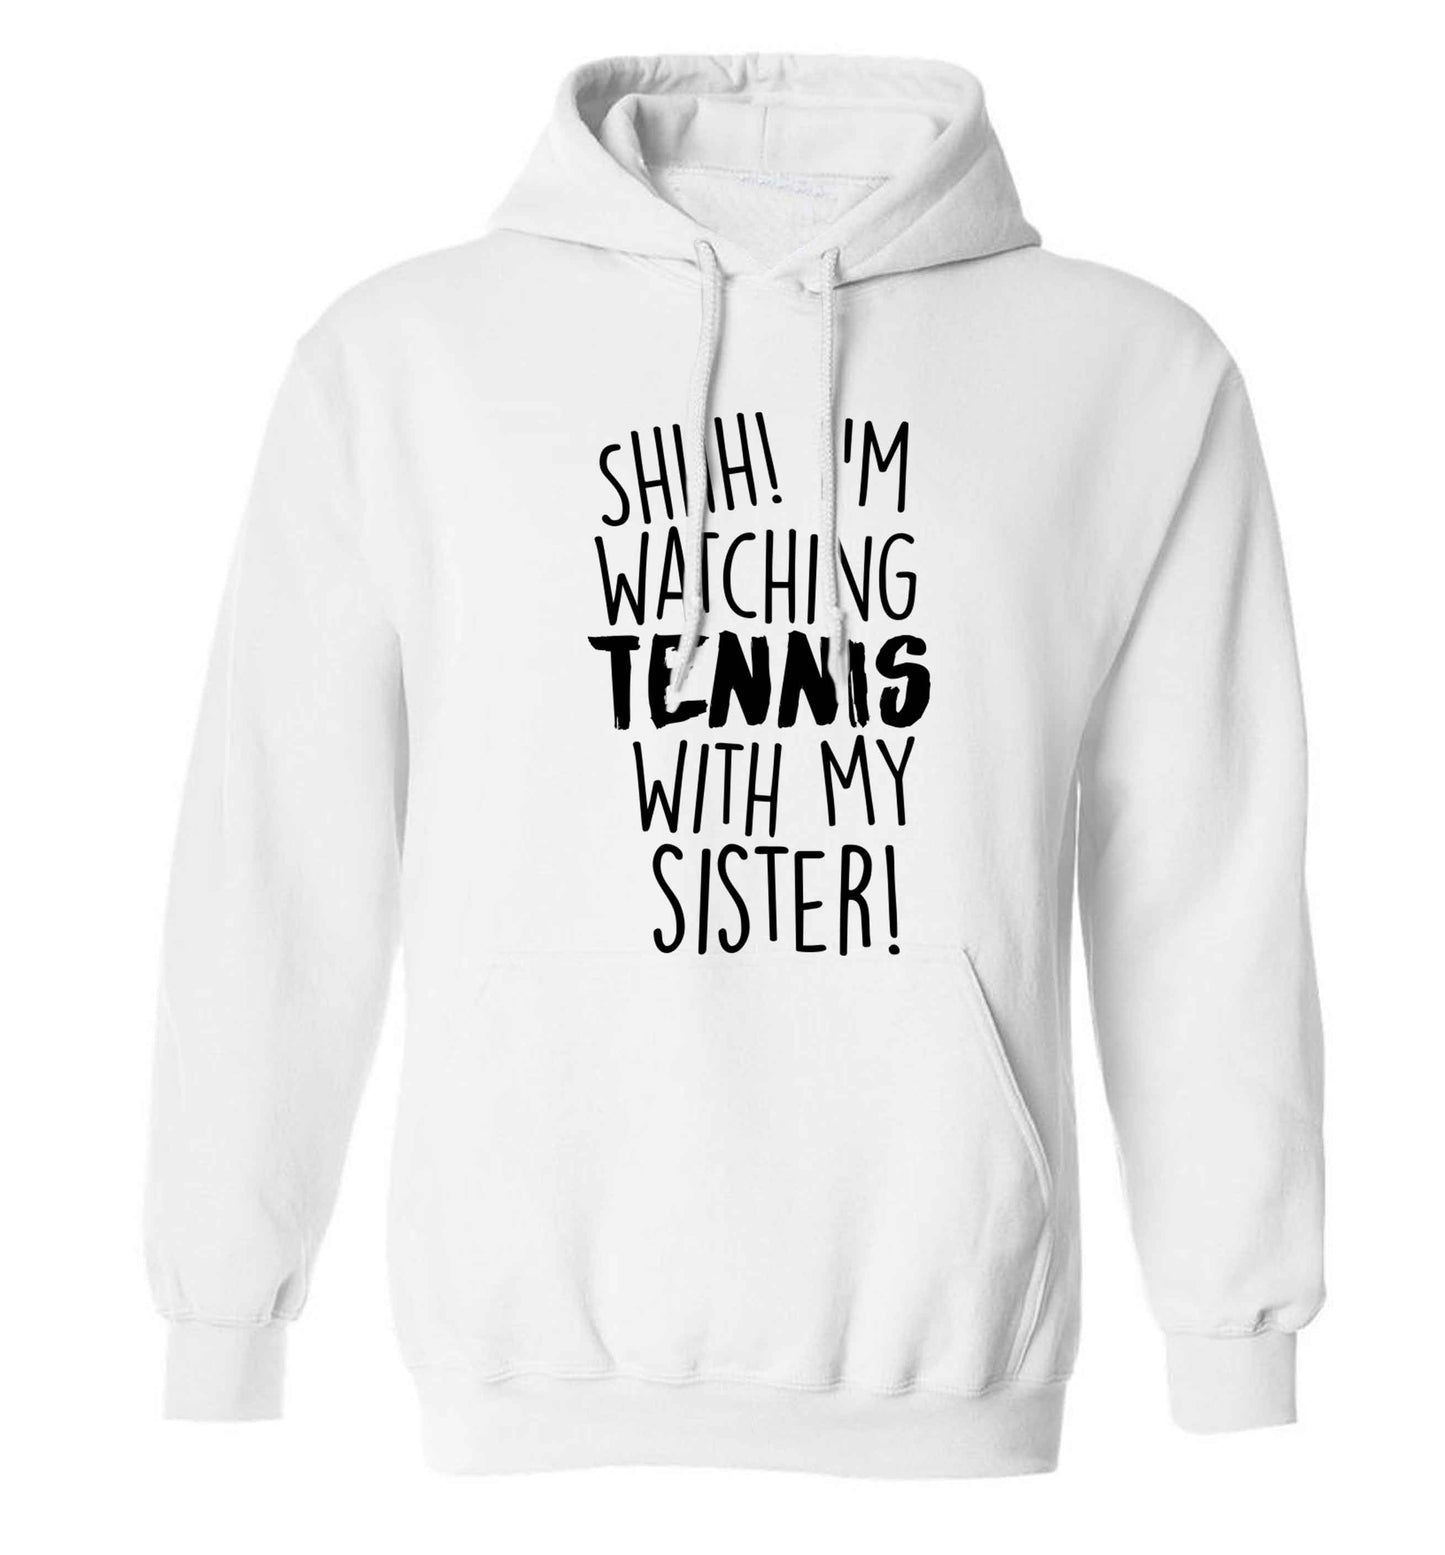 Shh! I'm watching tennis with my sister! adults unisex white hoodie 2XL